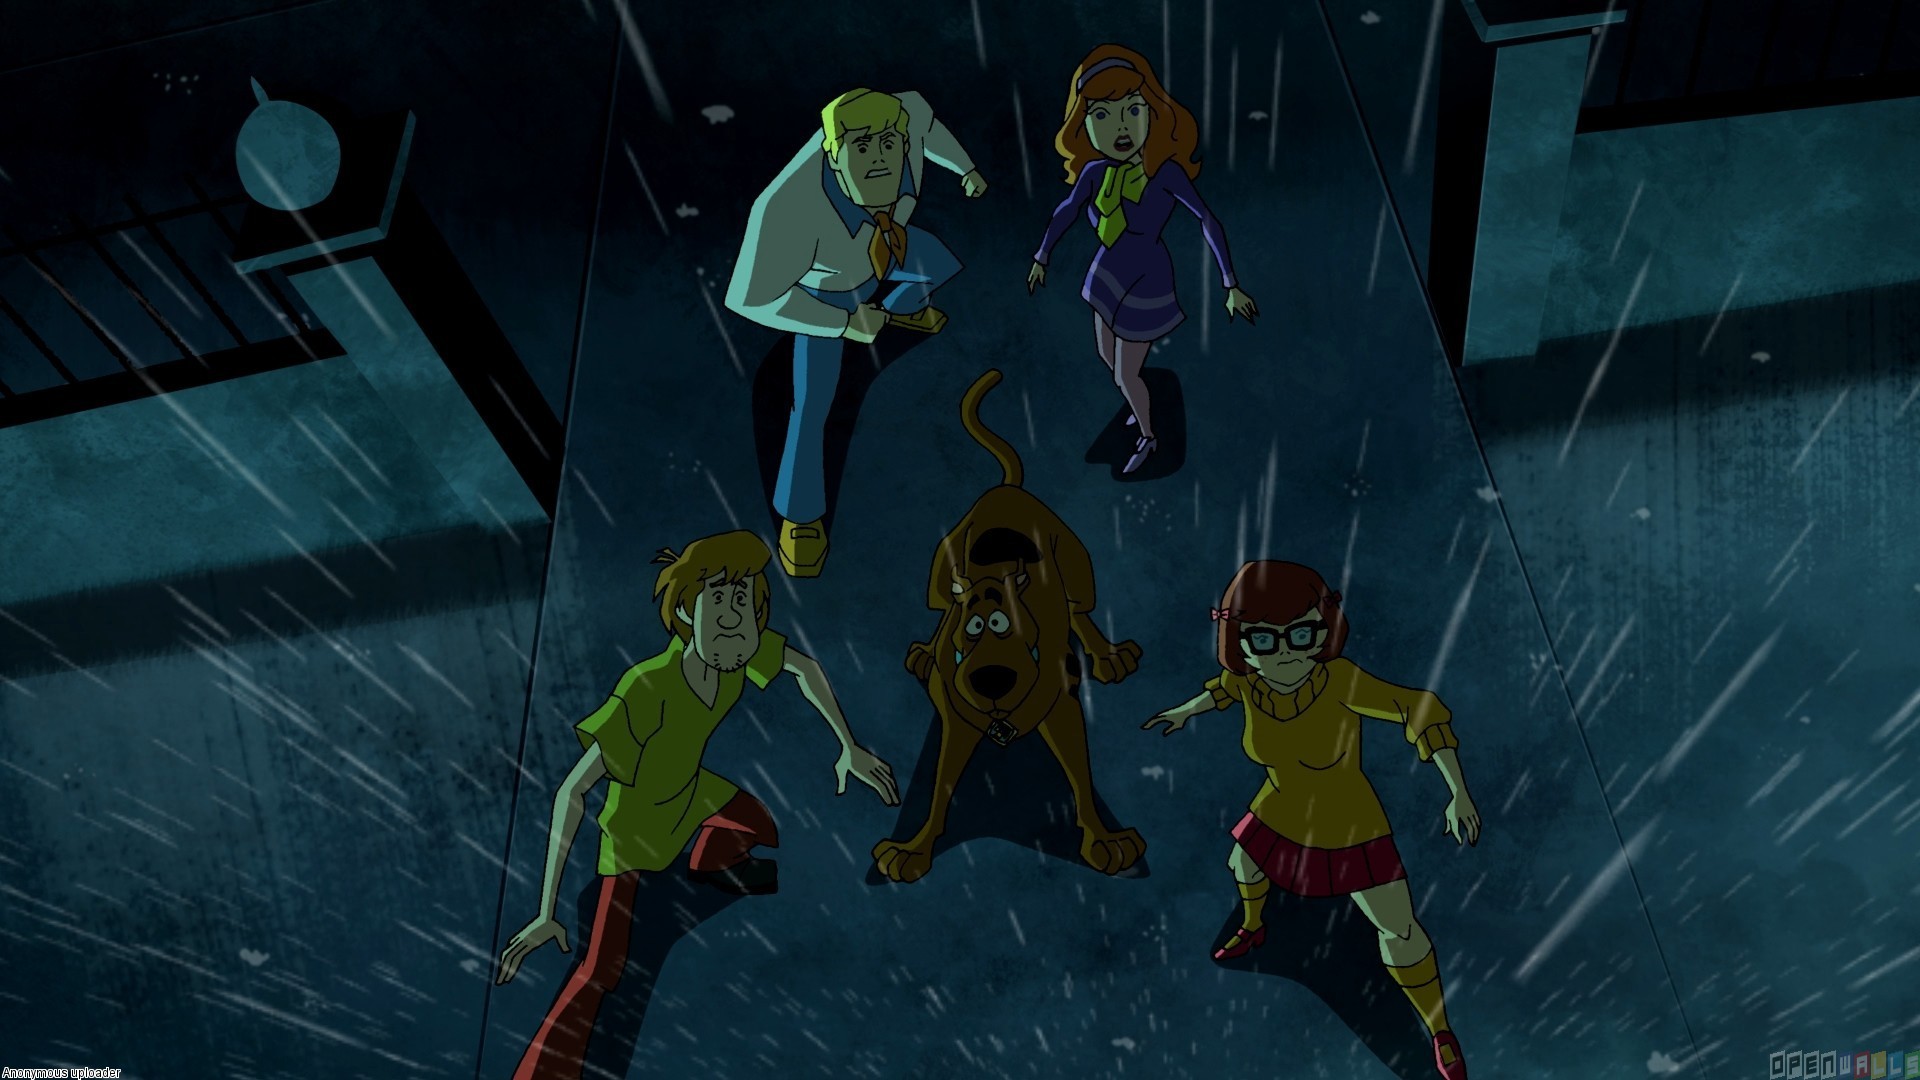 Animated Scooby Image Wallpaper Series Television